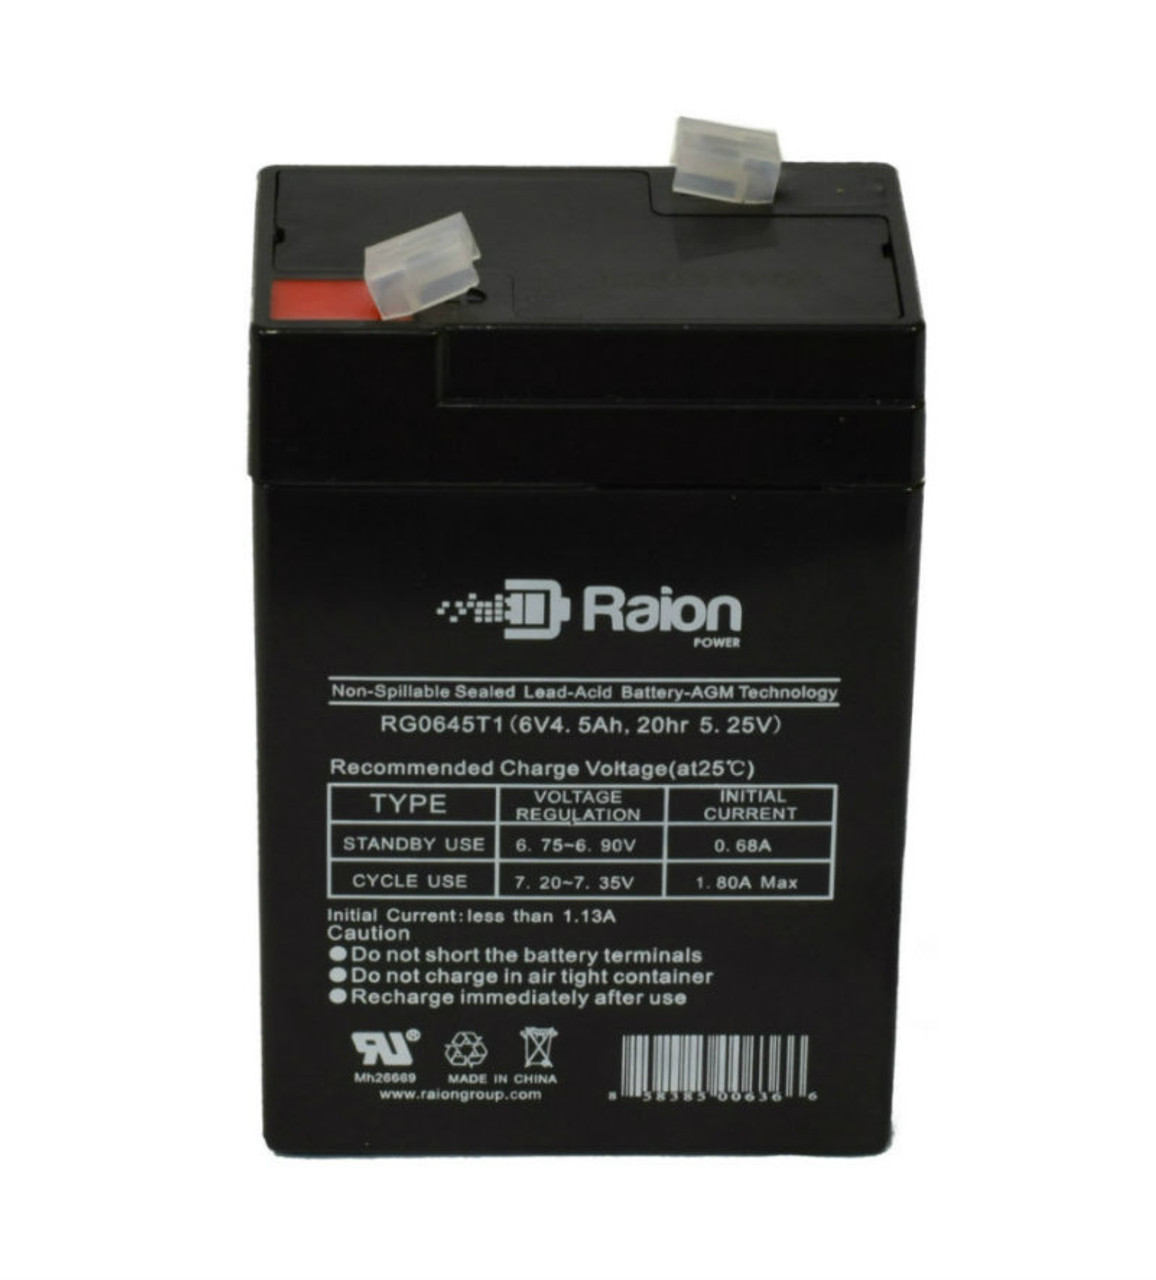 Raion Power RG0645T1 Replacement Battery Cartridge for Mcgaw 521 Intelligent Pump